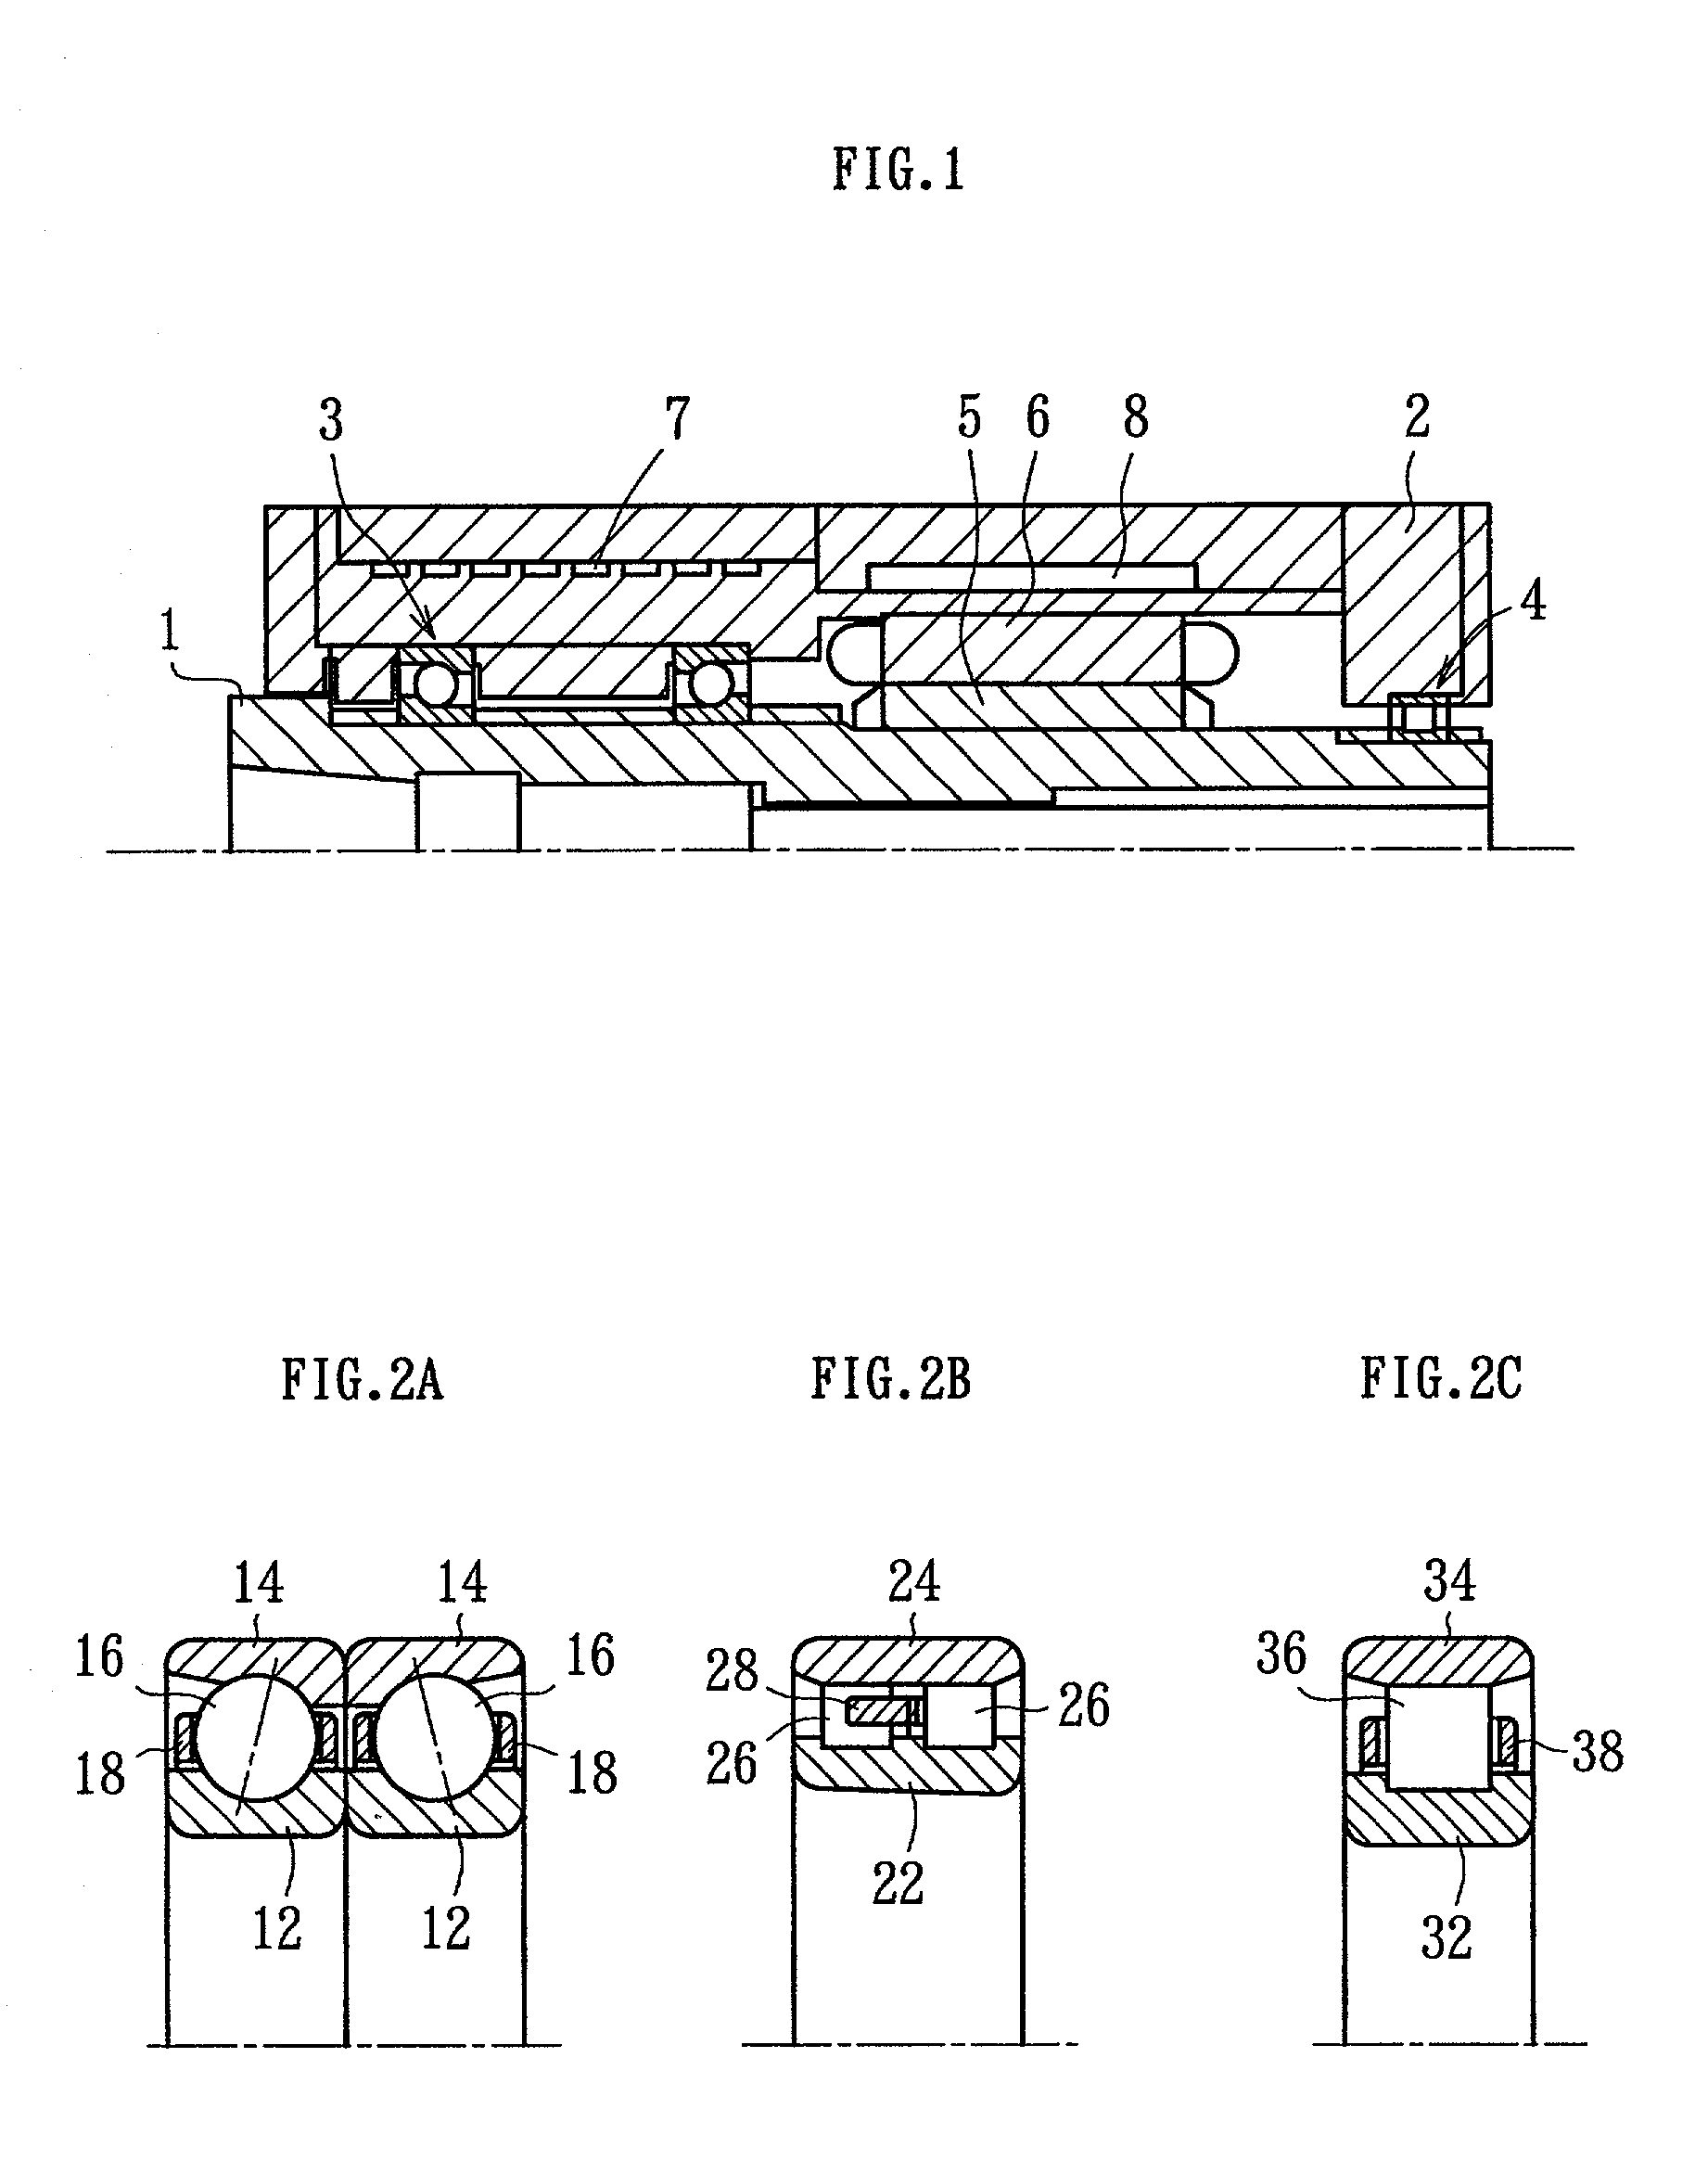 Bearing for main spindle of machine tool